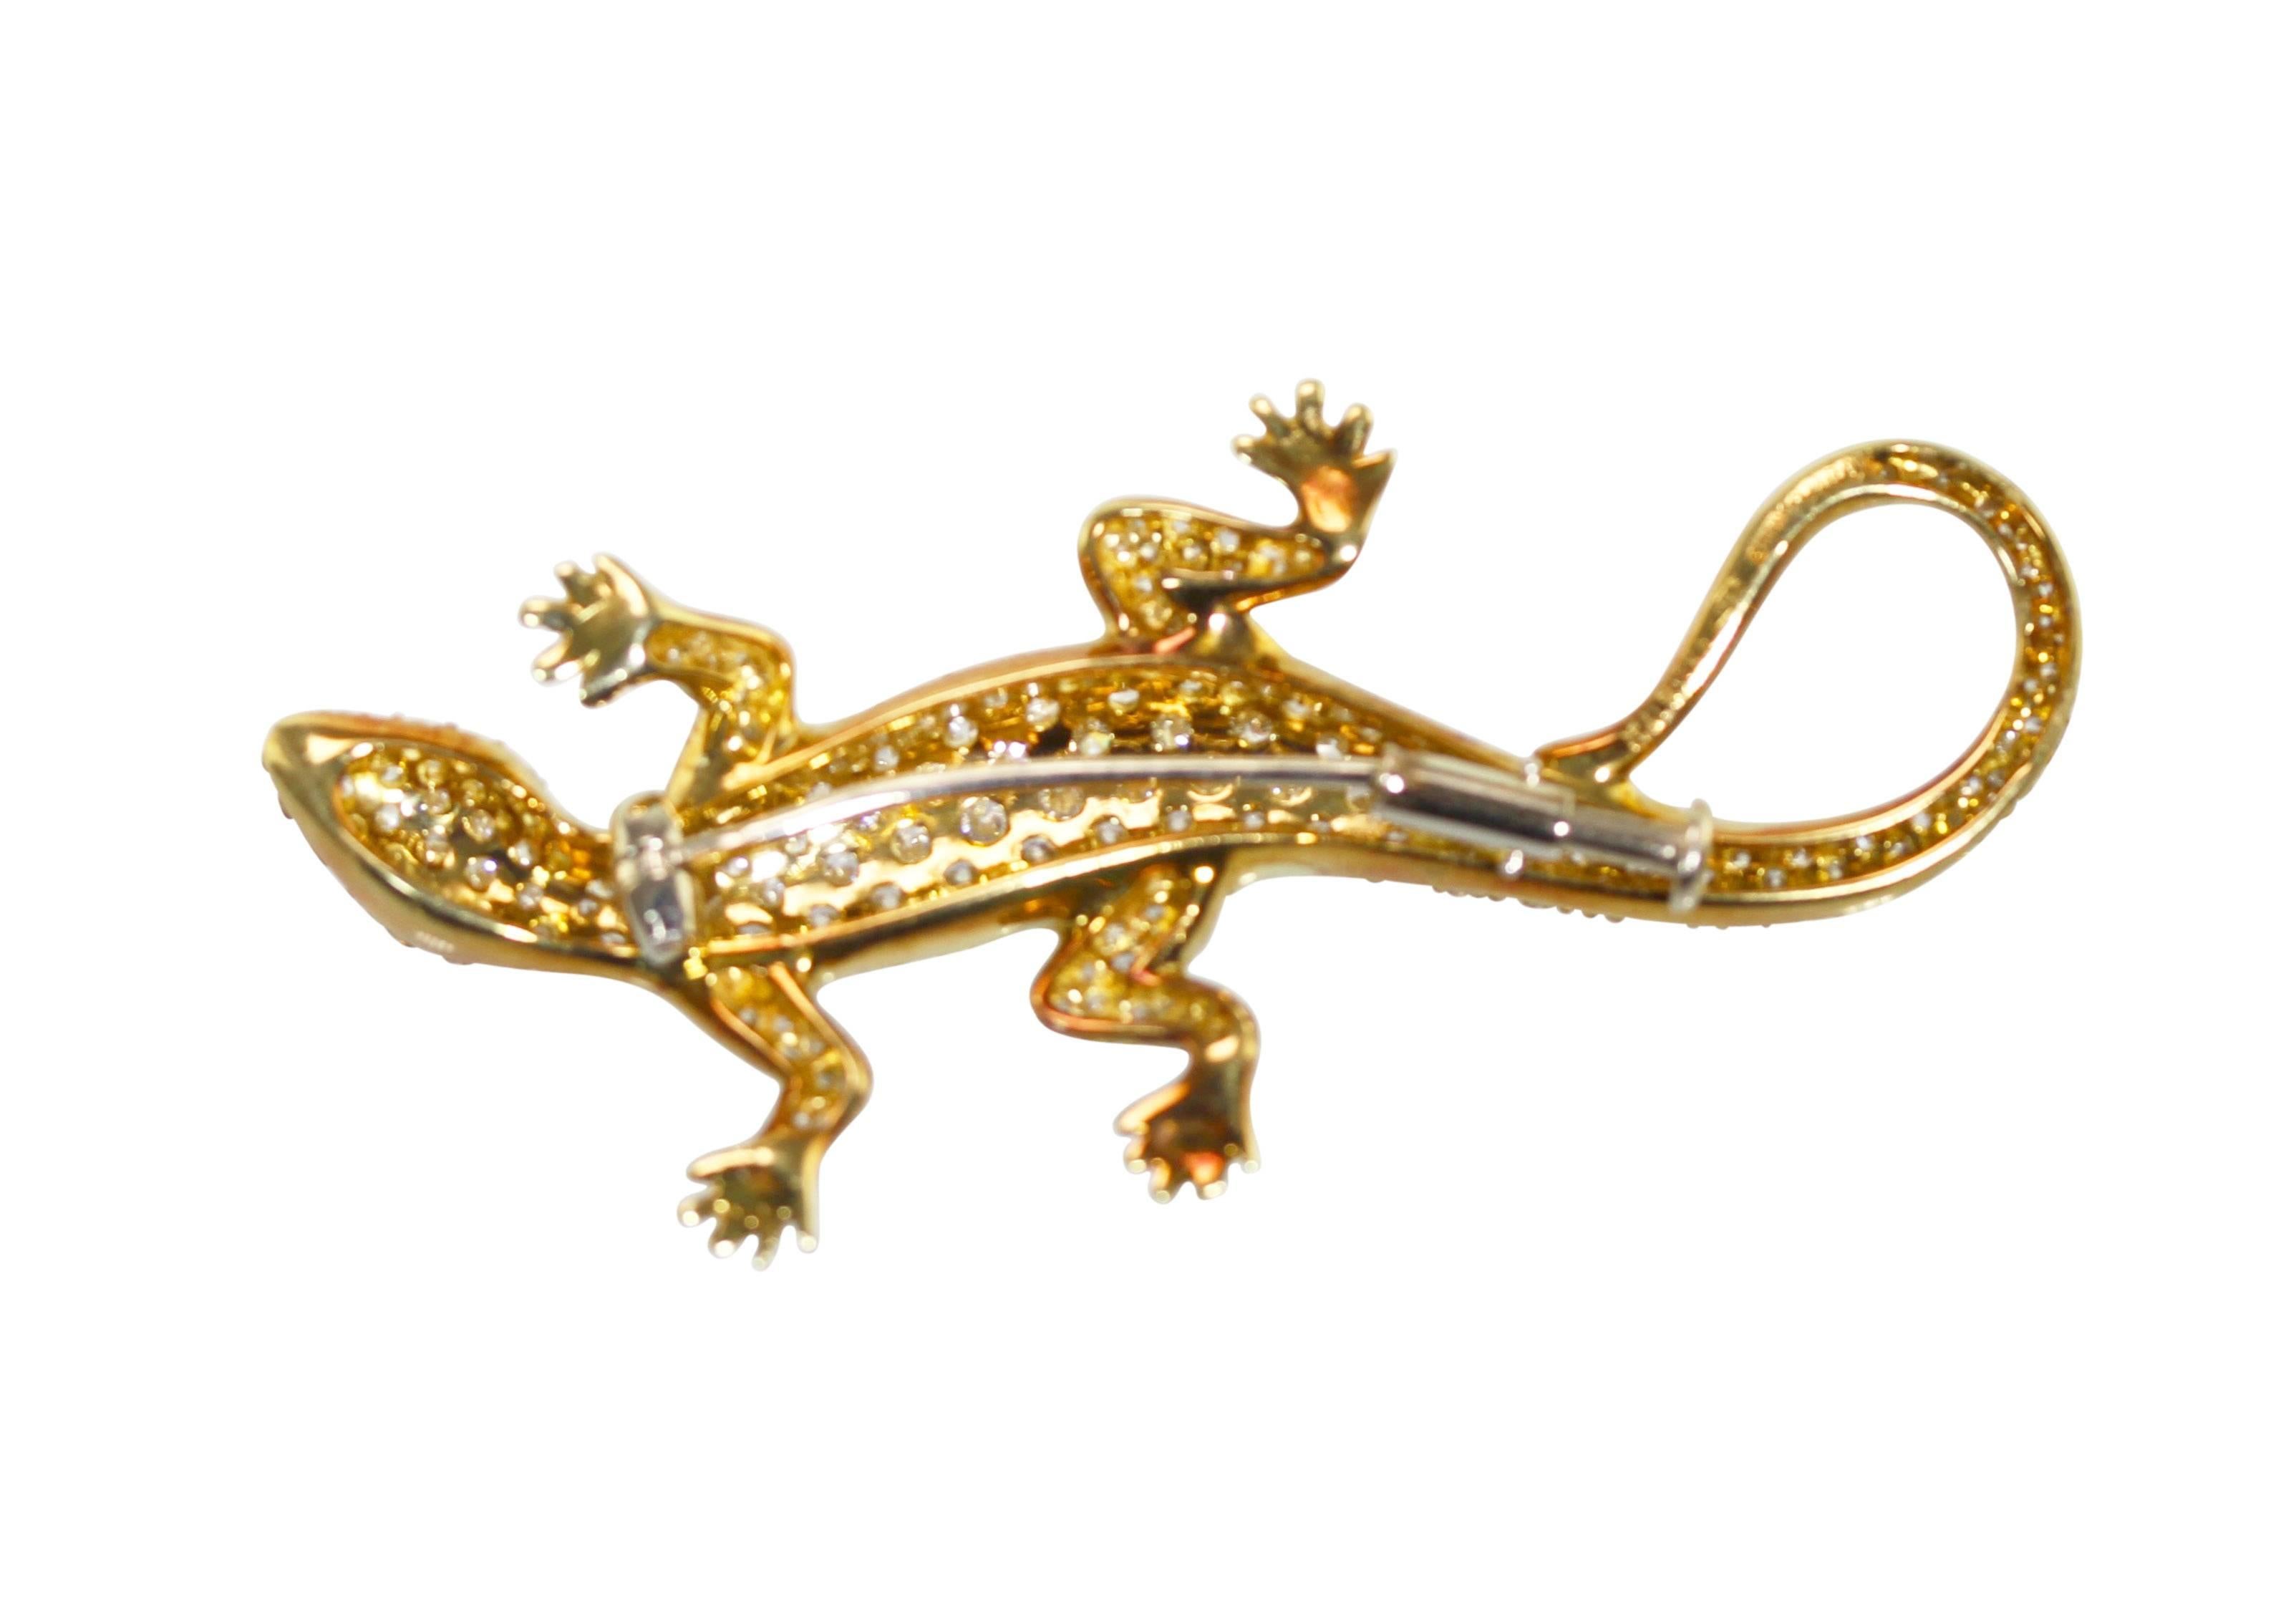 18 Karat Two-Tone Gold and Diamond Lizard Brooch, Italy
• Stamped 18k Italy 750 with Italian assay marks
• 200 round diamonds approximately 6.00 carats
• Measuring 2 1/4 by 1 1/8 inches, gross weight 12.4 grams